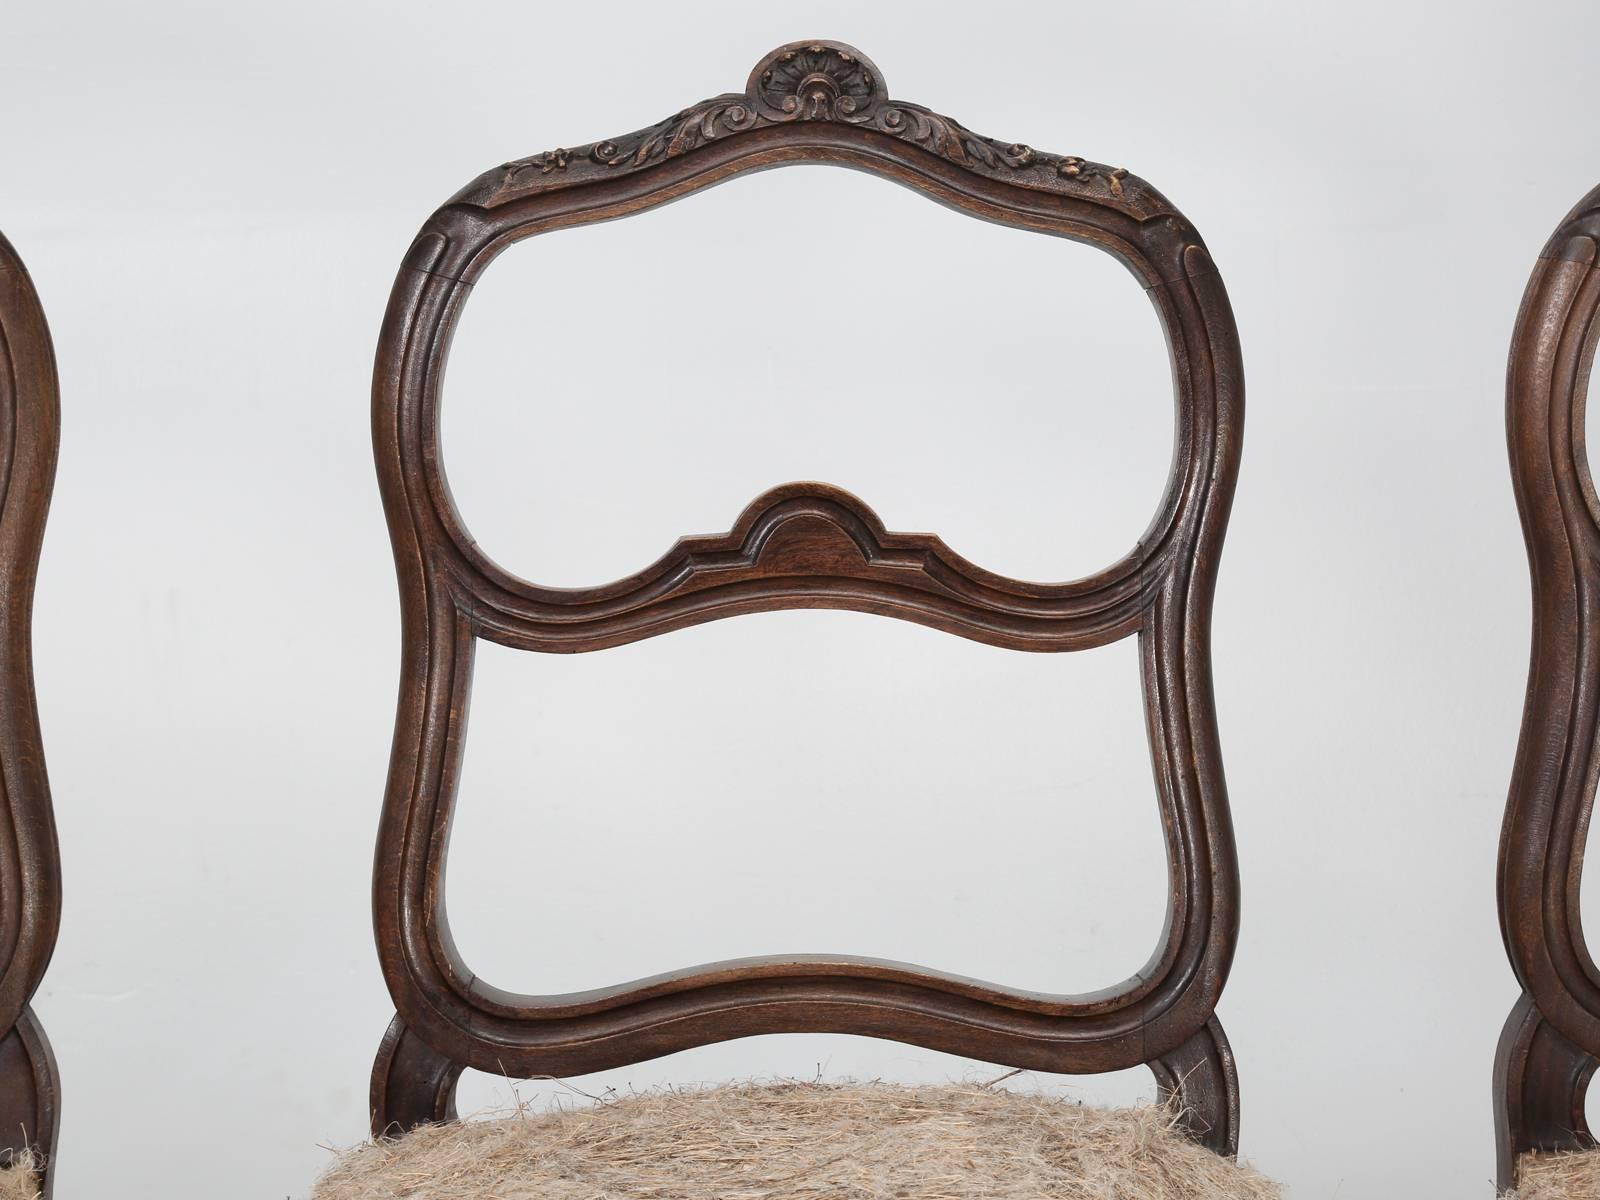 Antique French set of (6) chairs, intricately carved in the late 1800s in as found condition. This set of (6) antique French living room or parlor chairs, still retain their original horsehair and shredded coco padding and are finished in a French